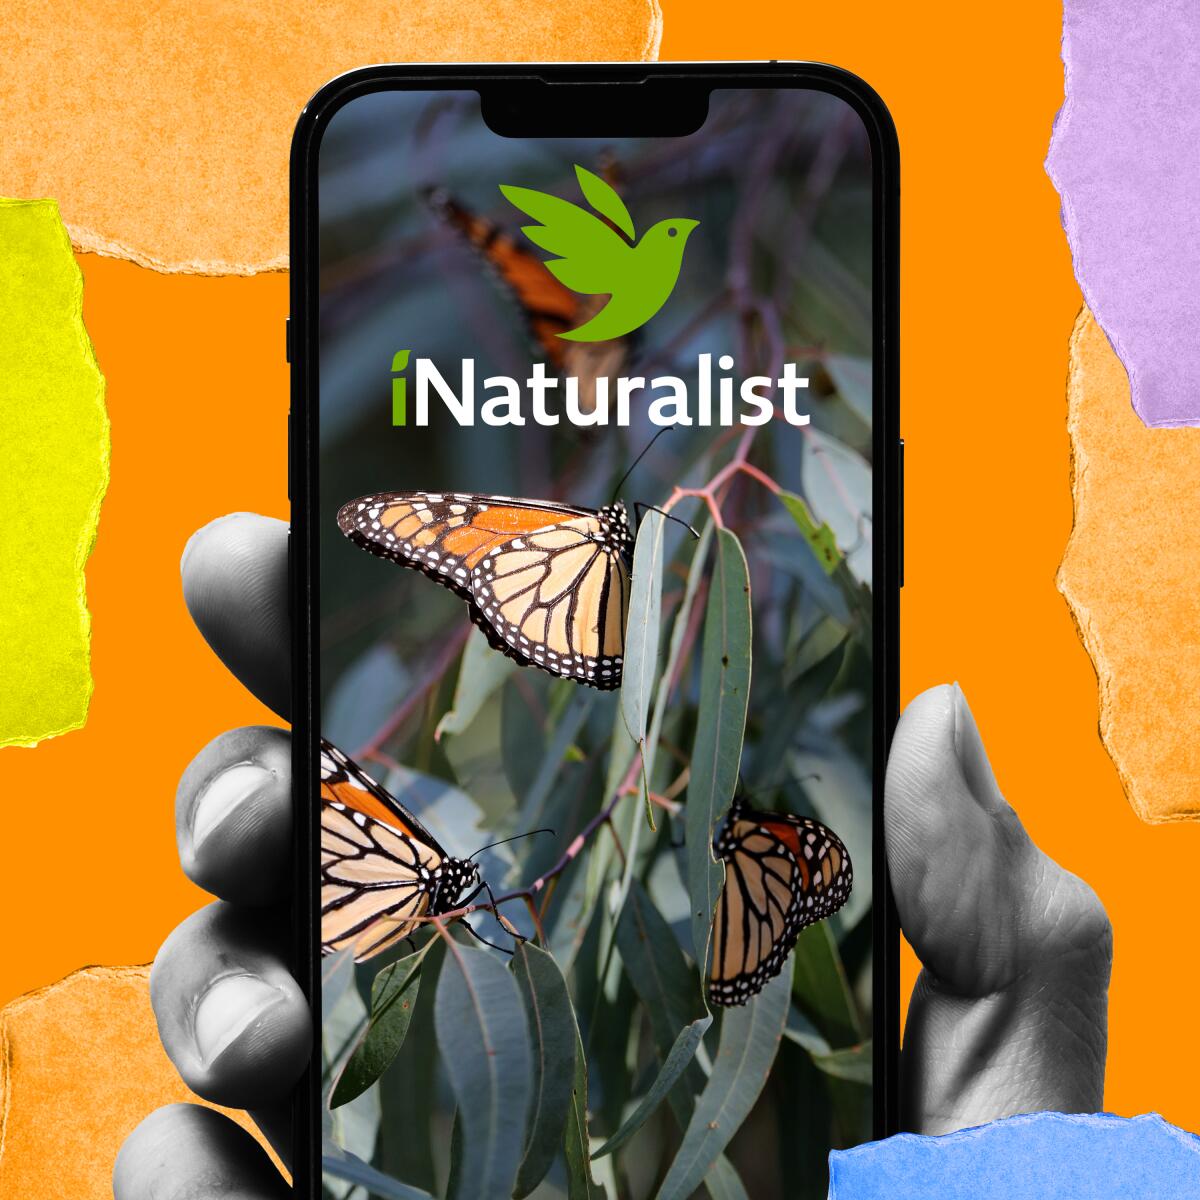 A photo of Monarch Butterflies with the iNaturalist logo overlayed.